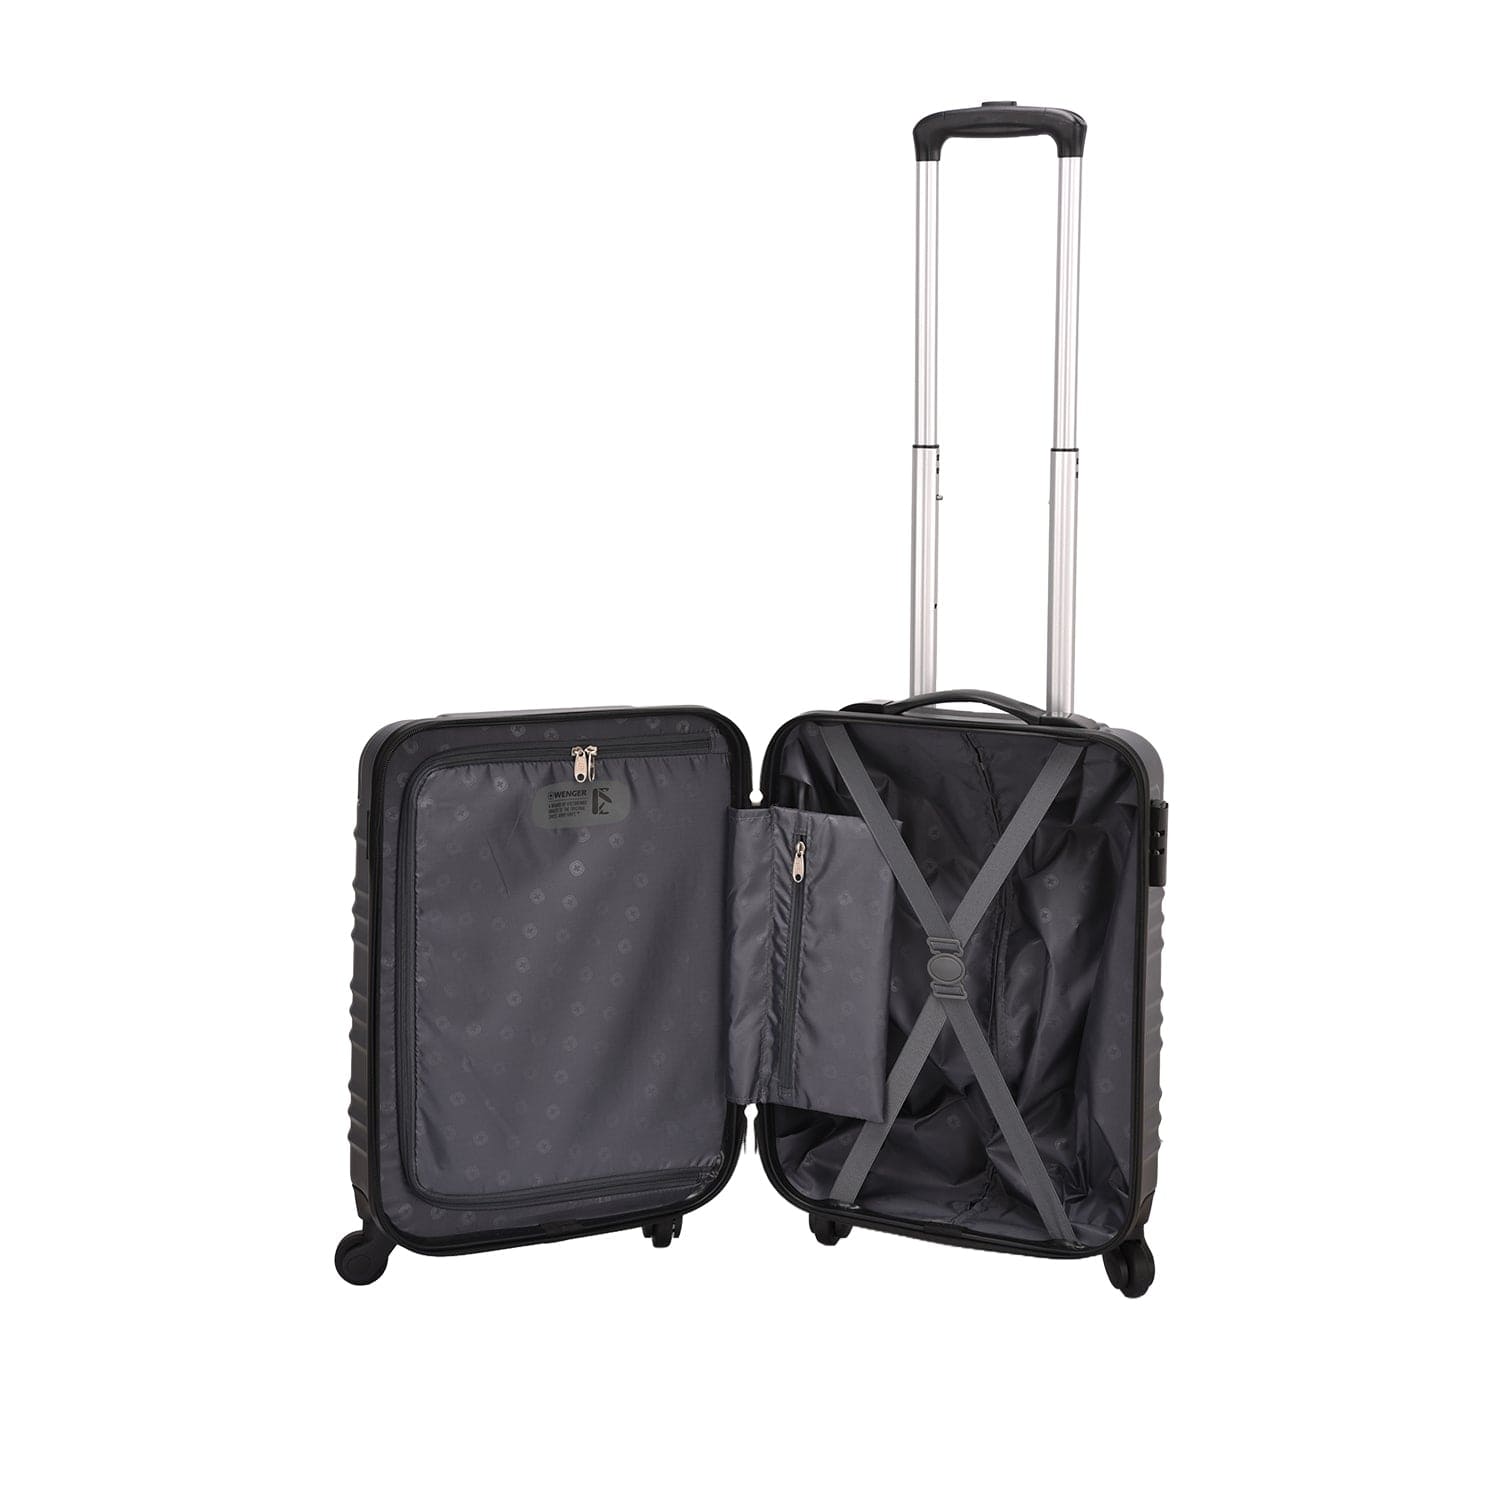 Wenger Amplar 3 Piece 53+65+75cm Hardside Non-Expandable Check-In Luggage Trolley Set Navy Blue - 653150